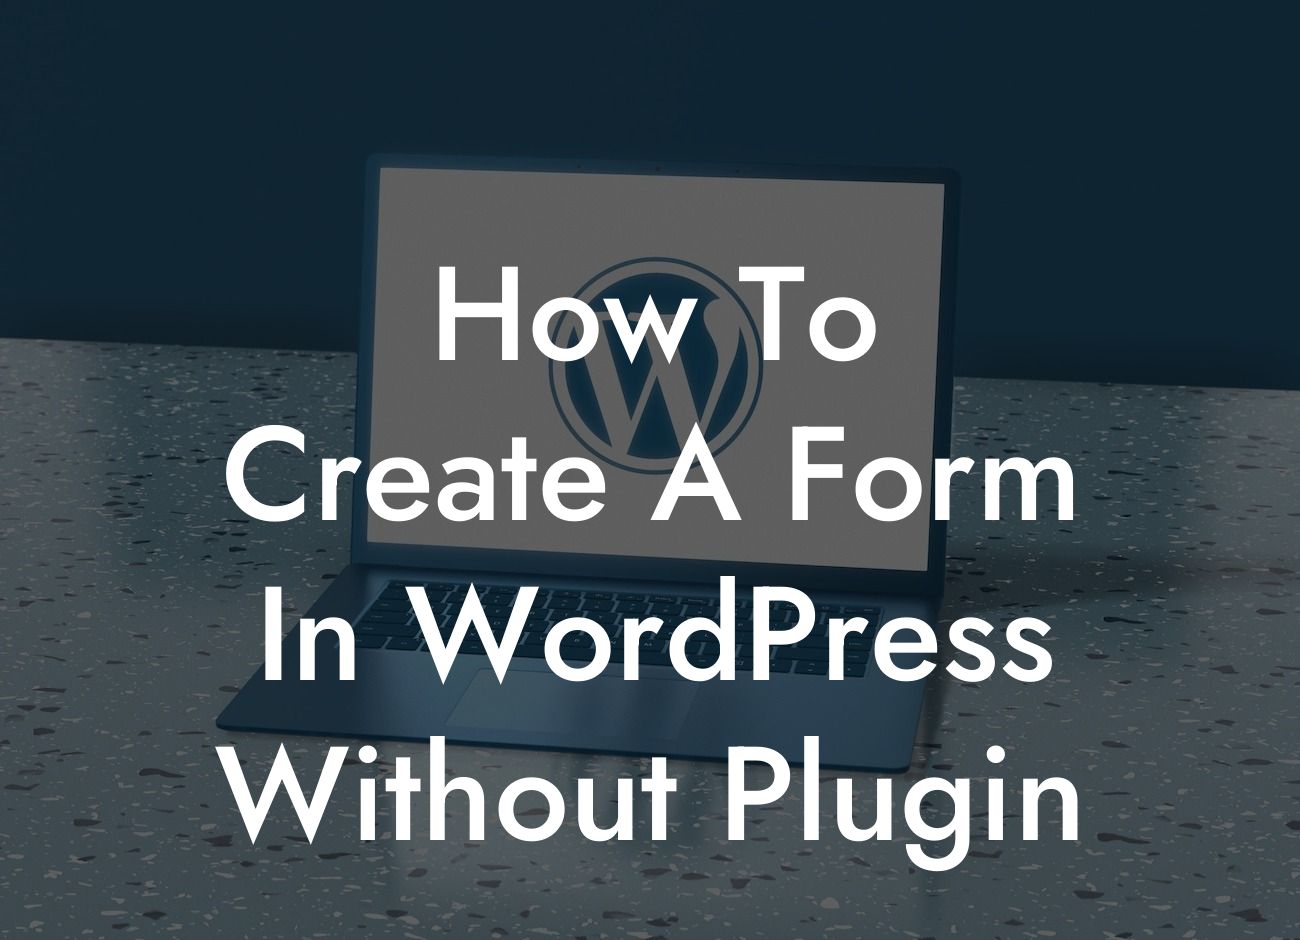 How To Create A Form In WordPress Without Plugin